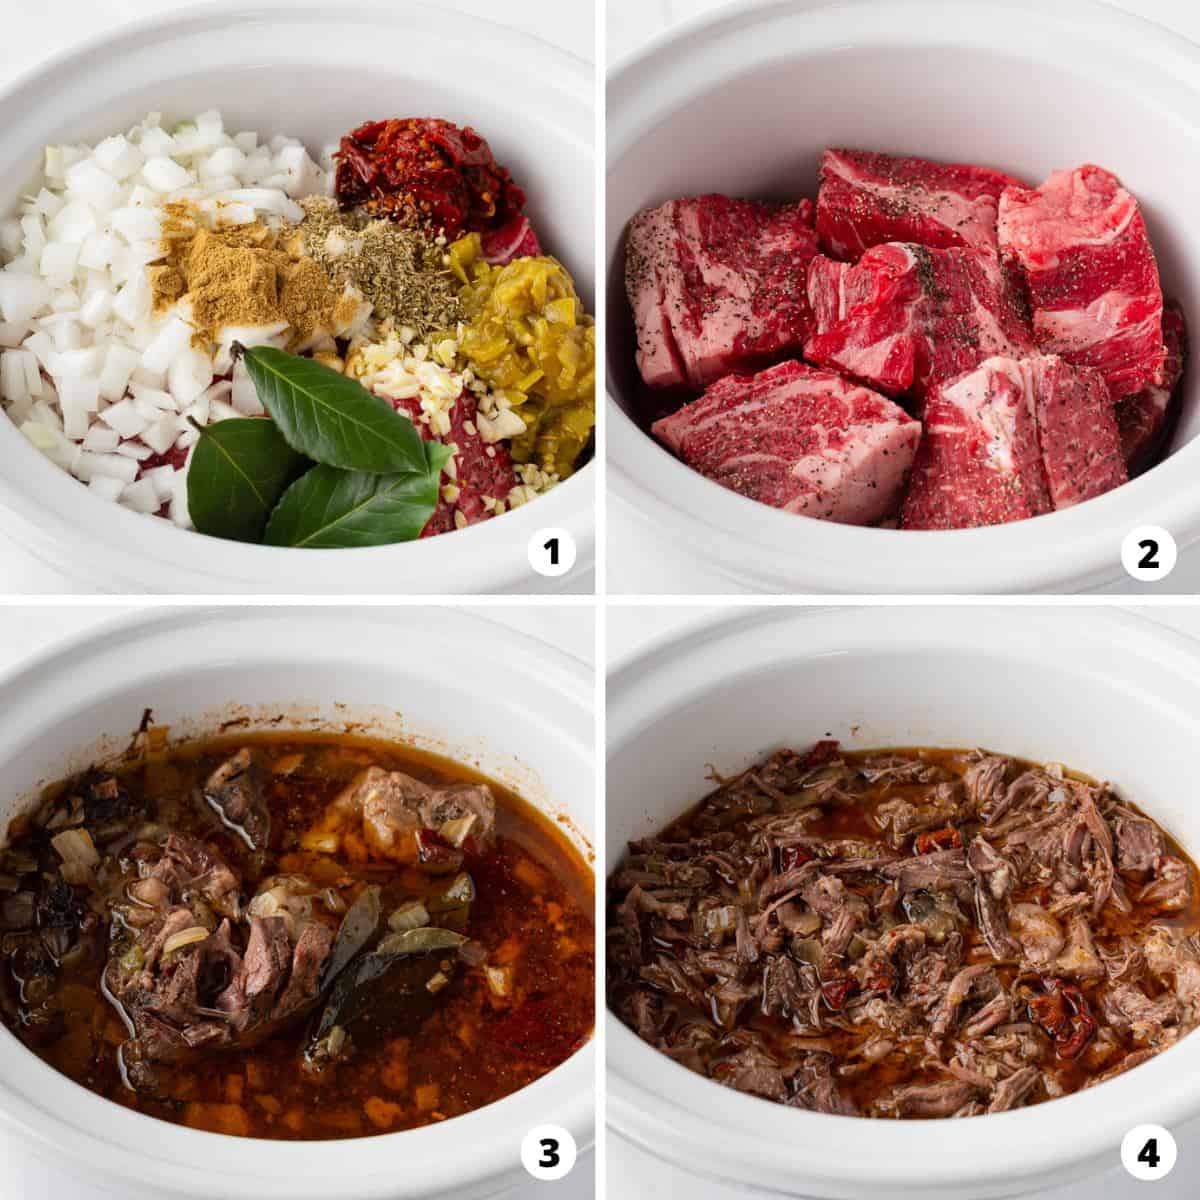 Showing how to make barbacoa in a 4 step collage.